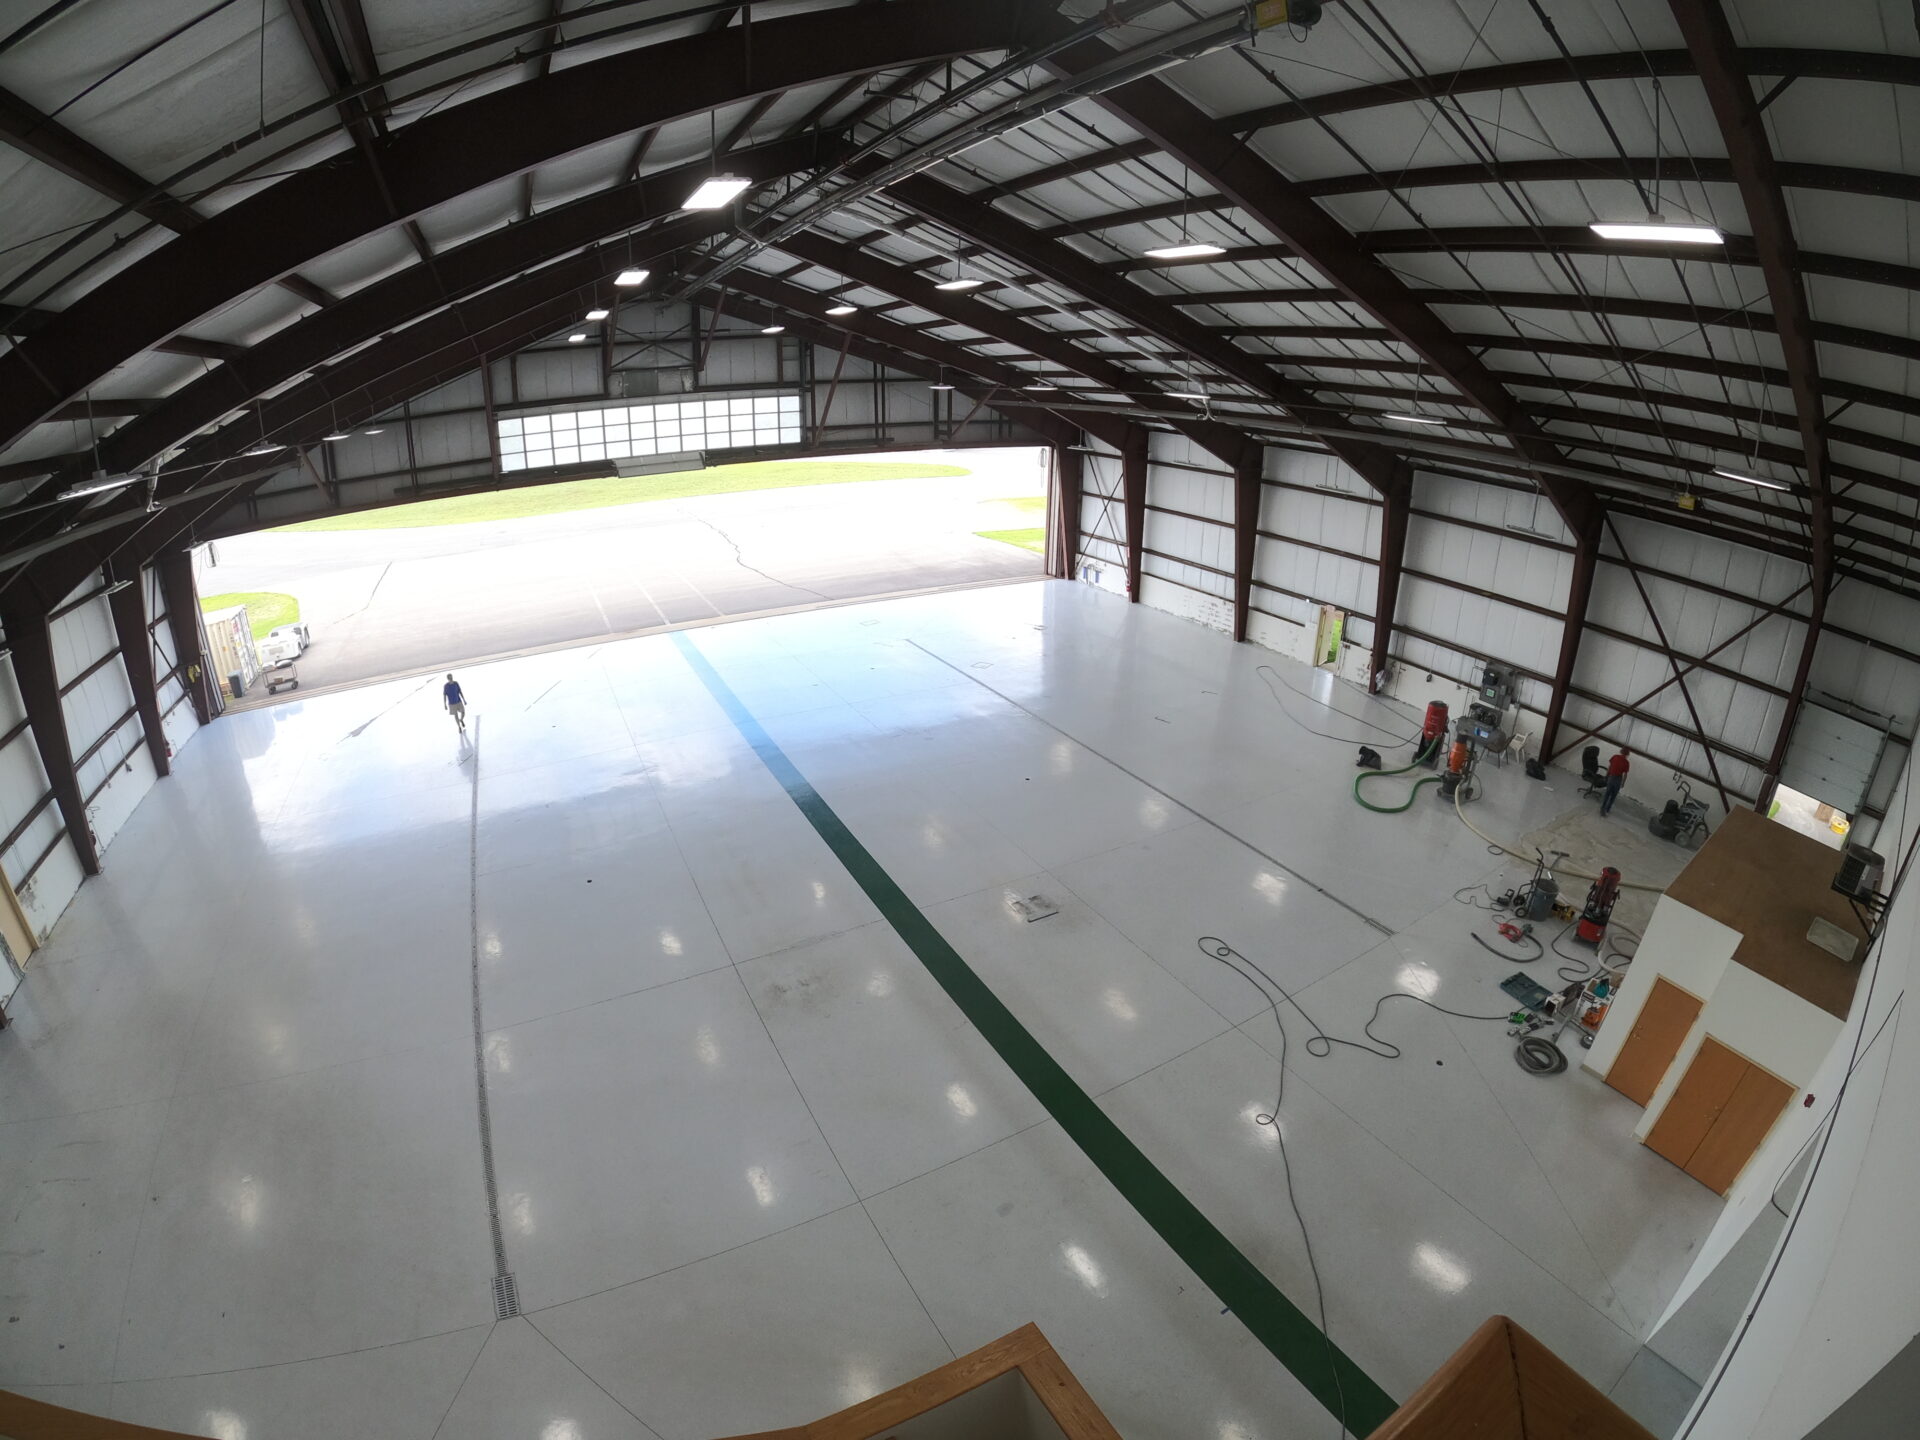 A before and after of an epoxy removal job in Nashua, New Hampshire in an aircraft hangar.